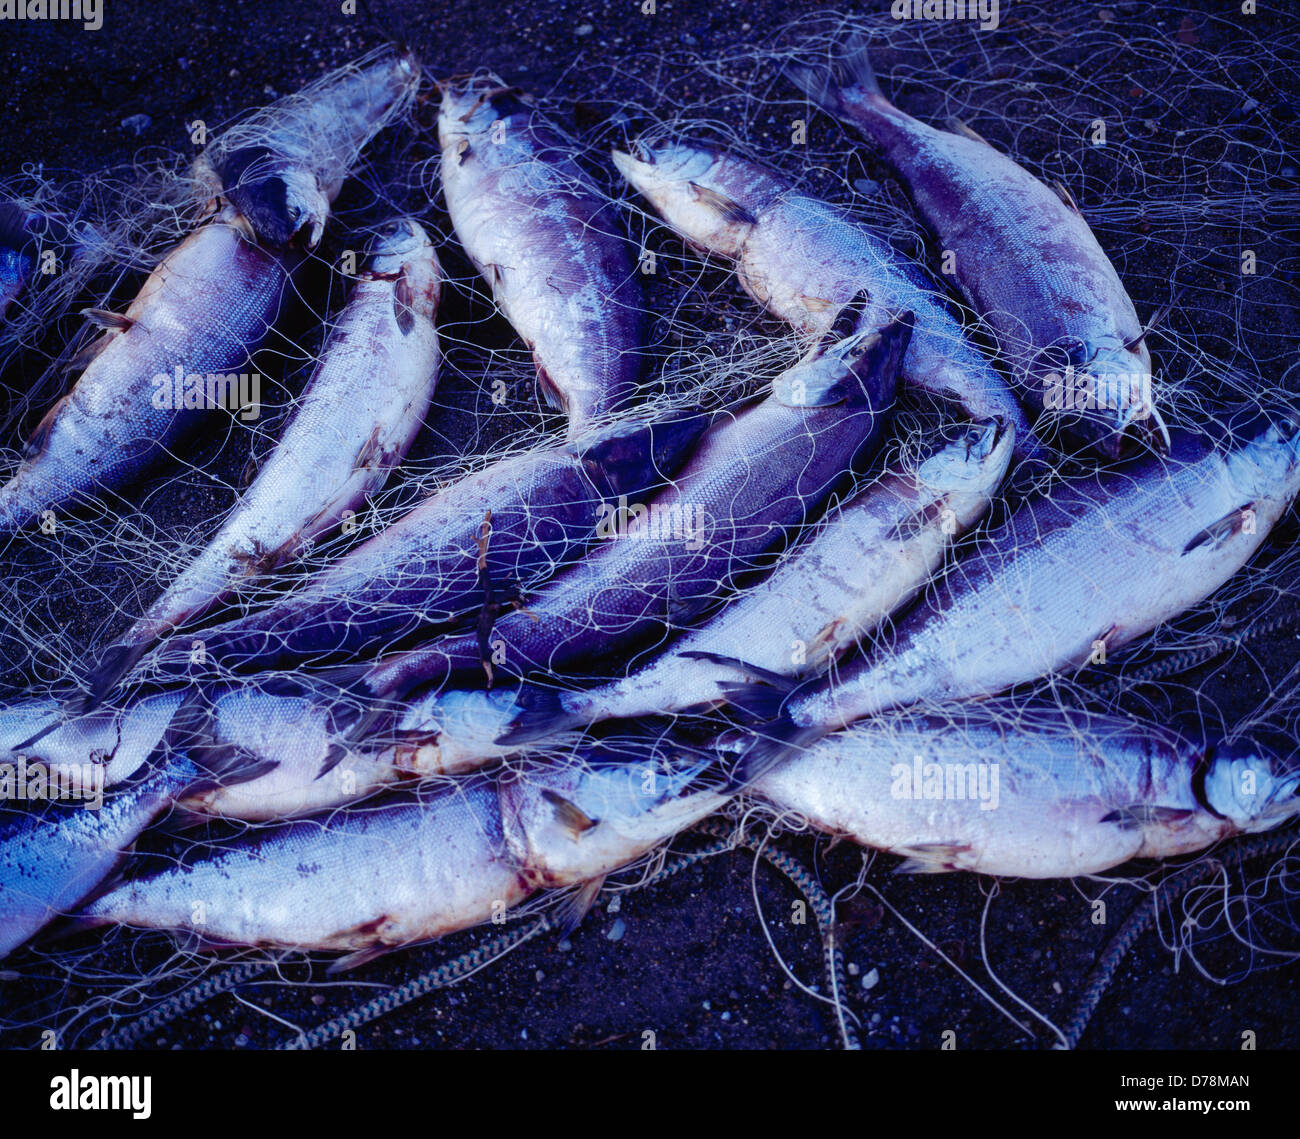 https://c8.alamy.com/comp/D78MAN/wasted-red-or-sockeye-salmon-in-commercial-fishing-gill-net-either-D78MAN.jpg